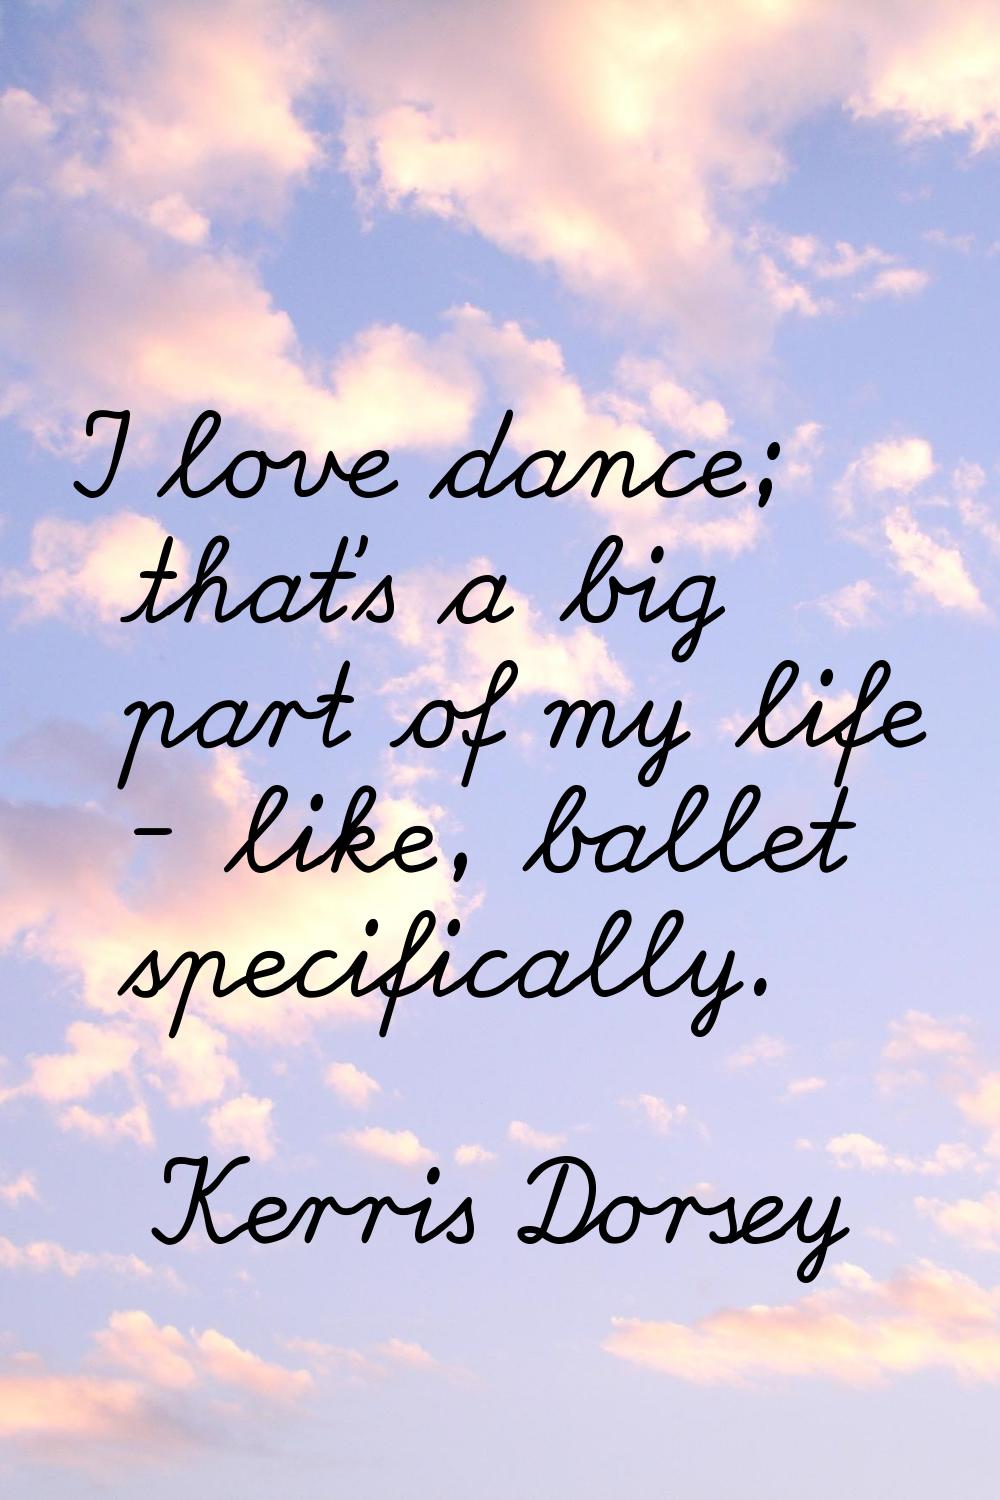 I love dance; that's a big part of my life - like, ballet specifically.